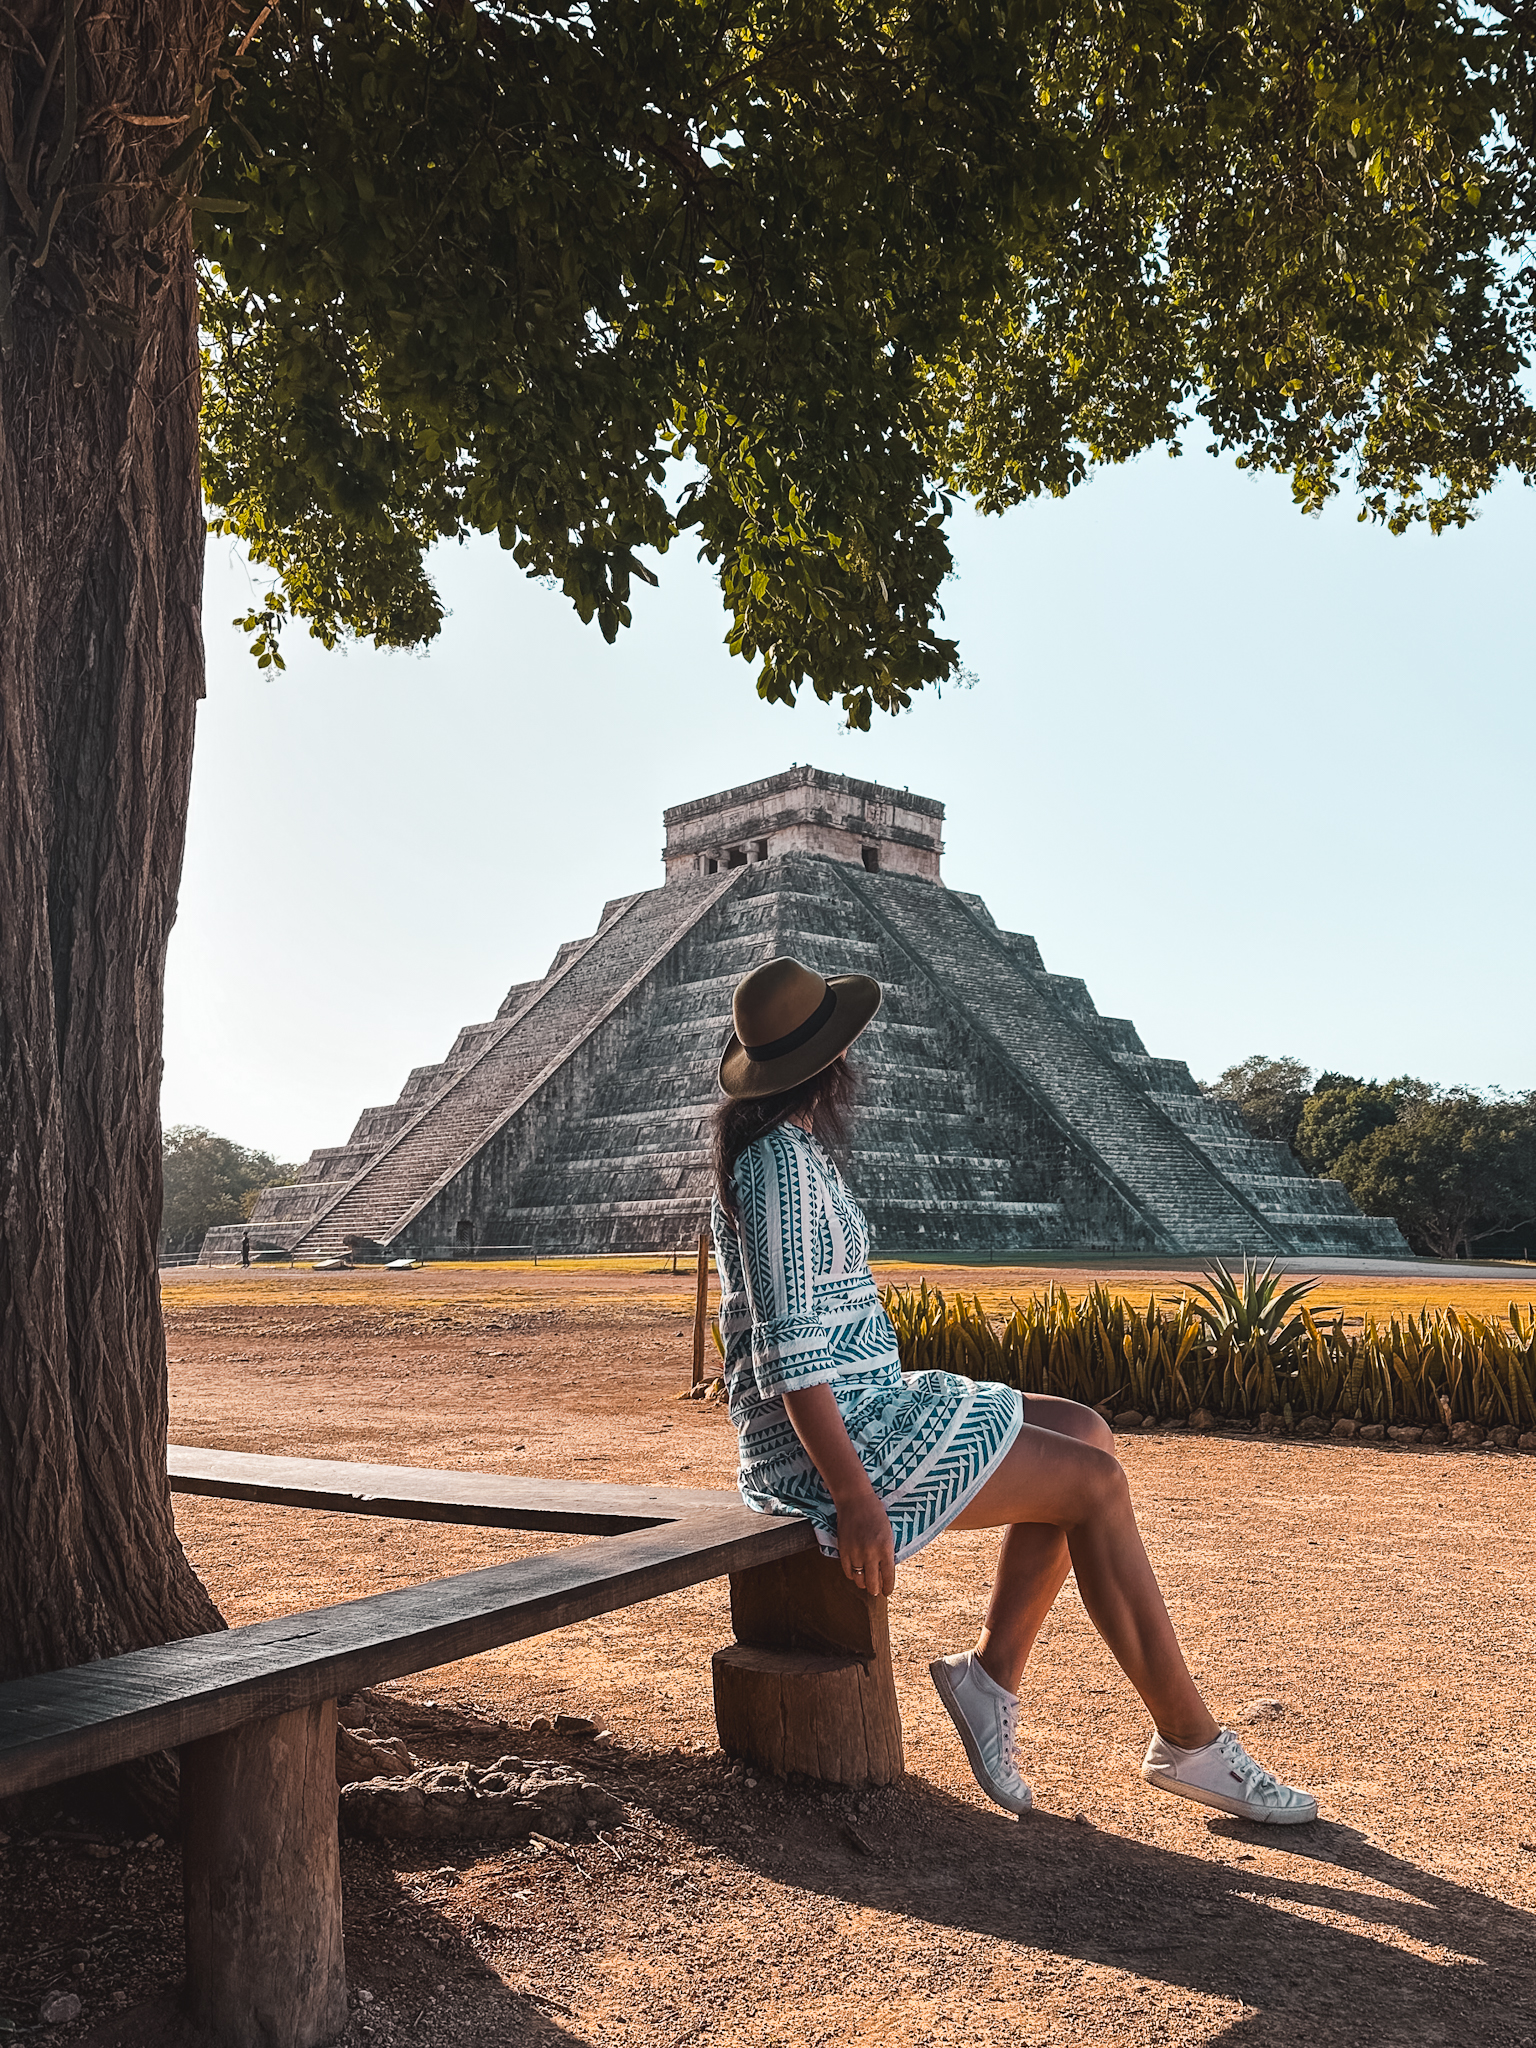 Valladolid, Mexico-best Instagram spots in Valladolid - Chichen Itza archaeological site - wooden bench under a lush tree with the Temple of Kukulkan Mayan pyramid in the background